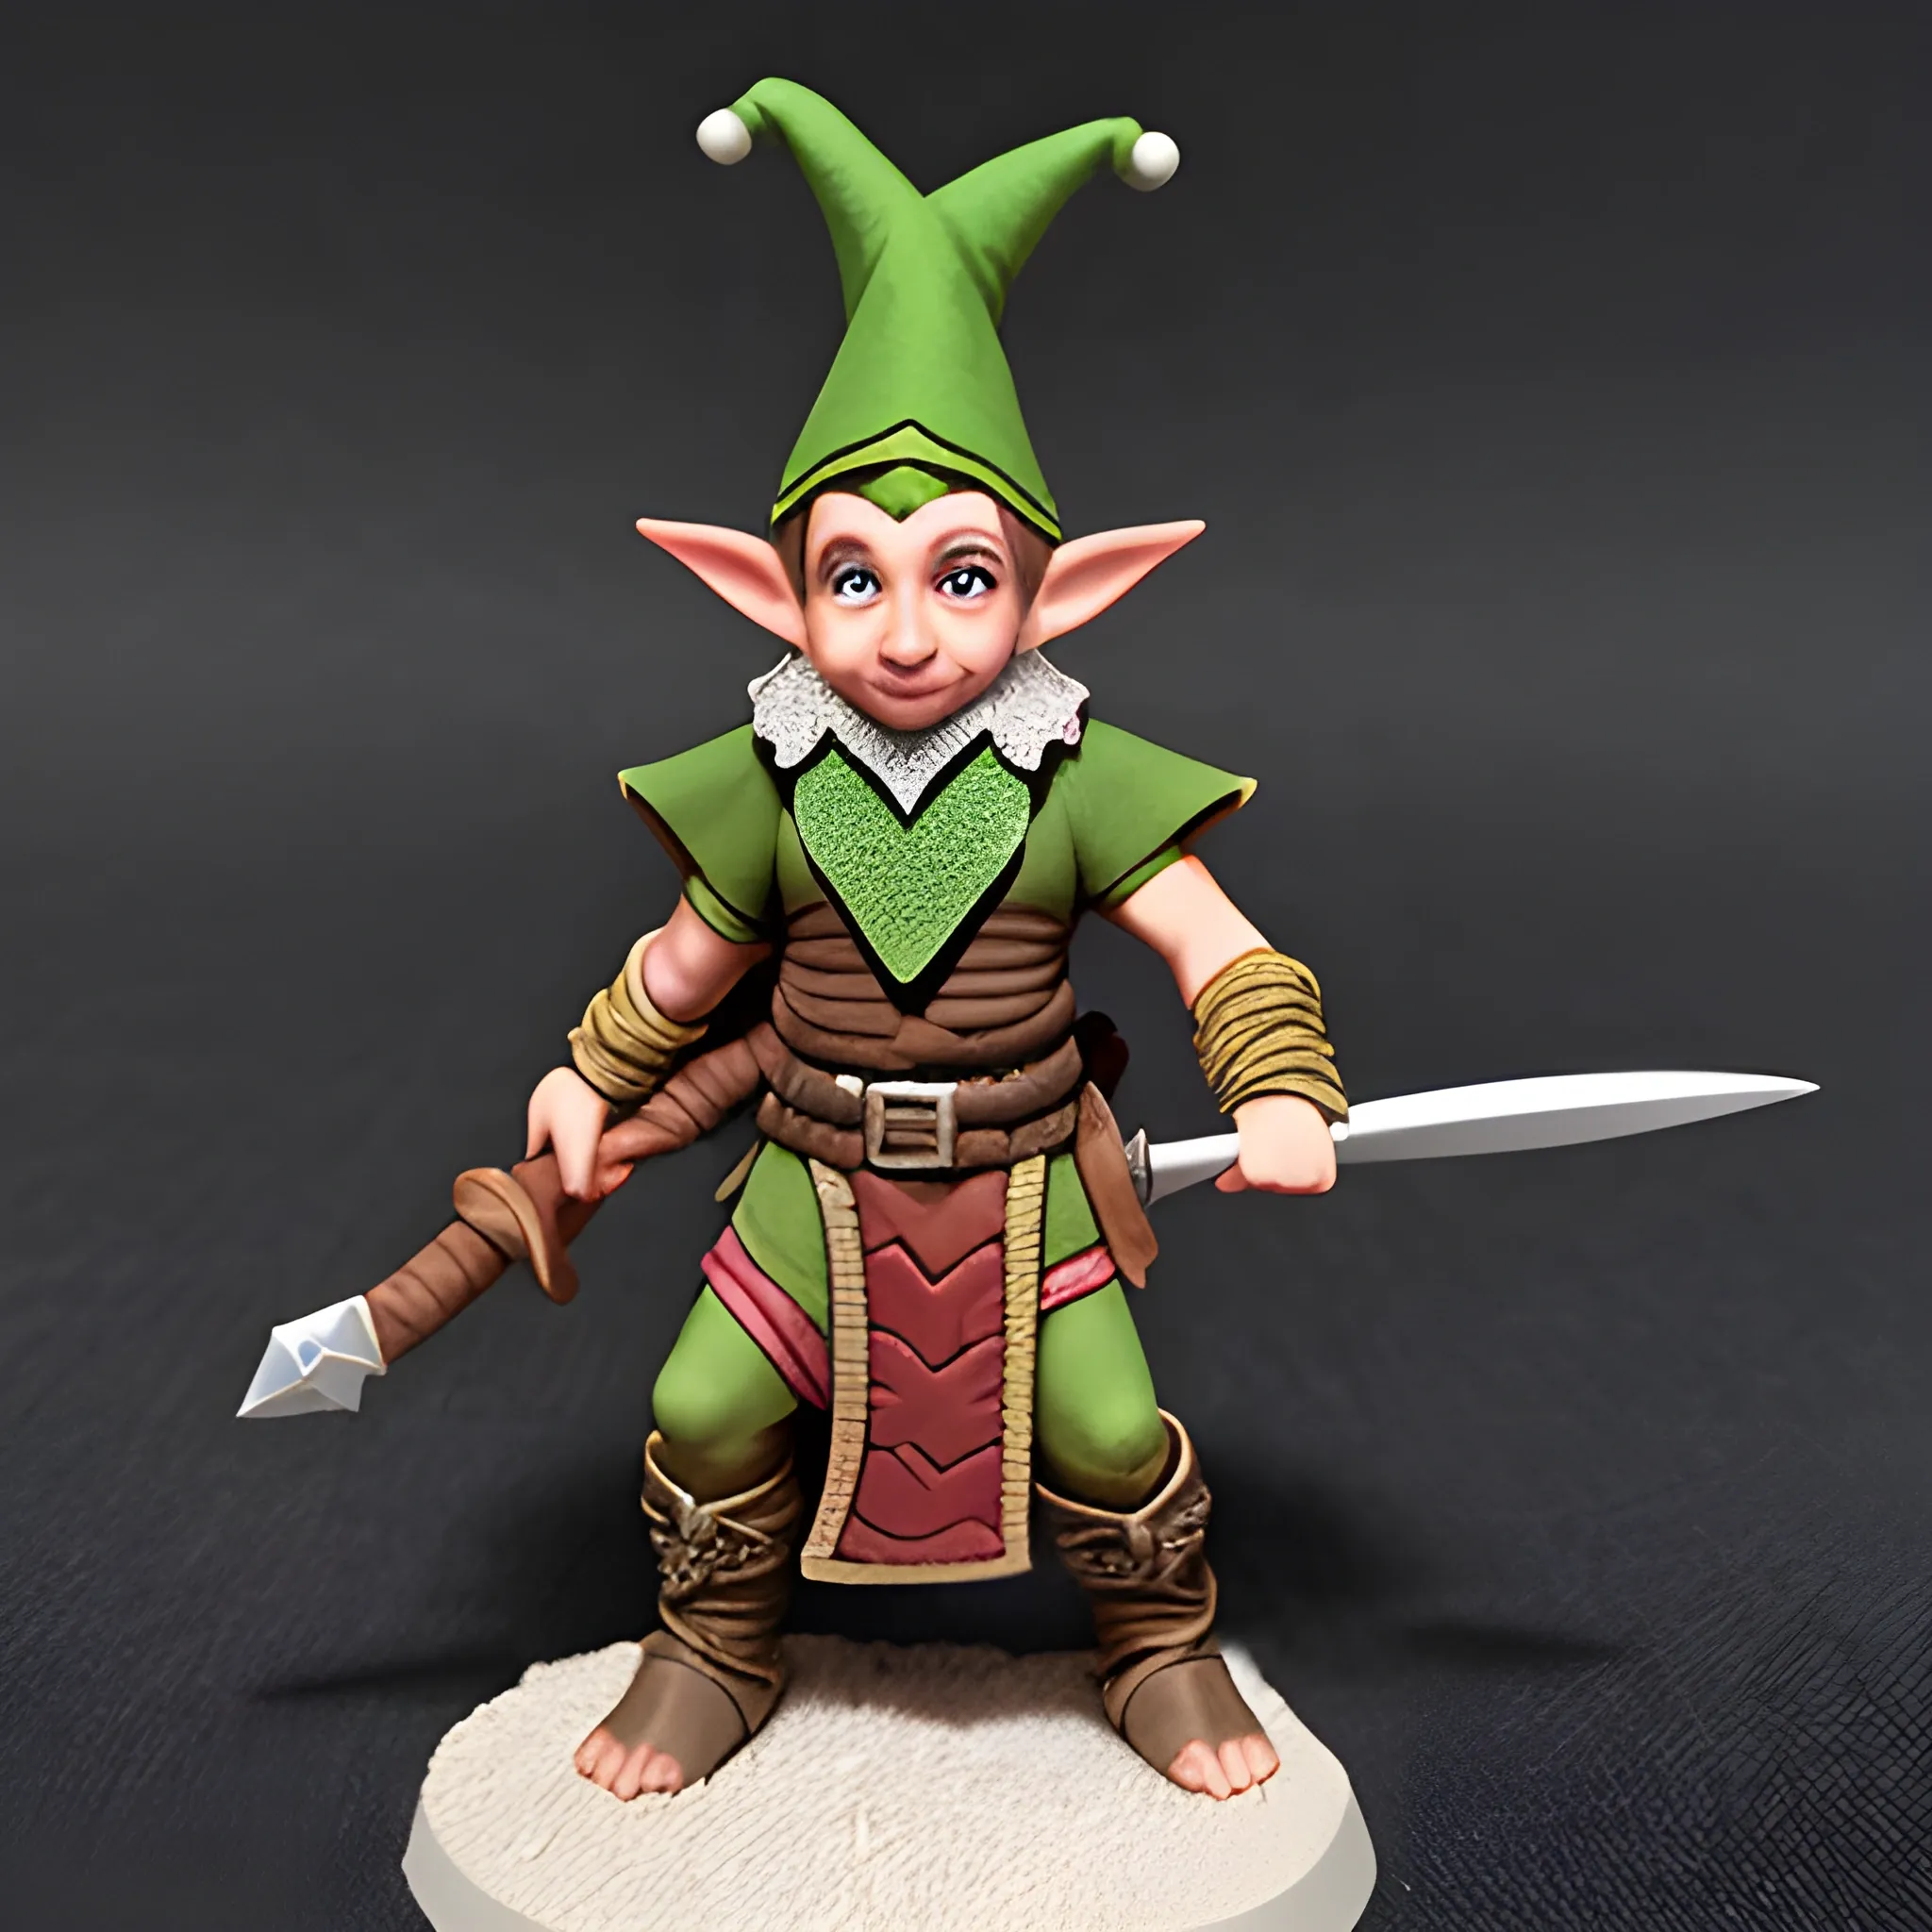 A Dungeons and Dragons elf, complete view of him